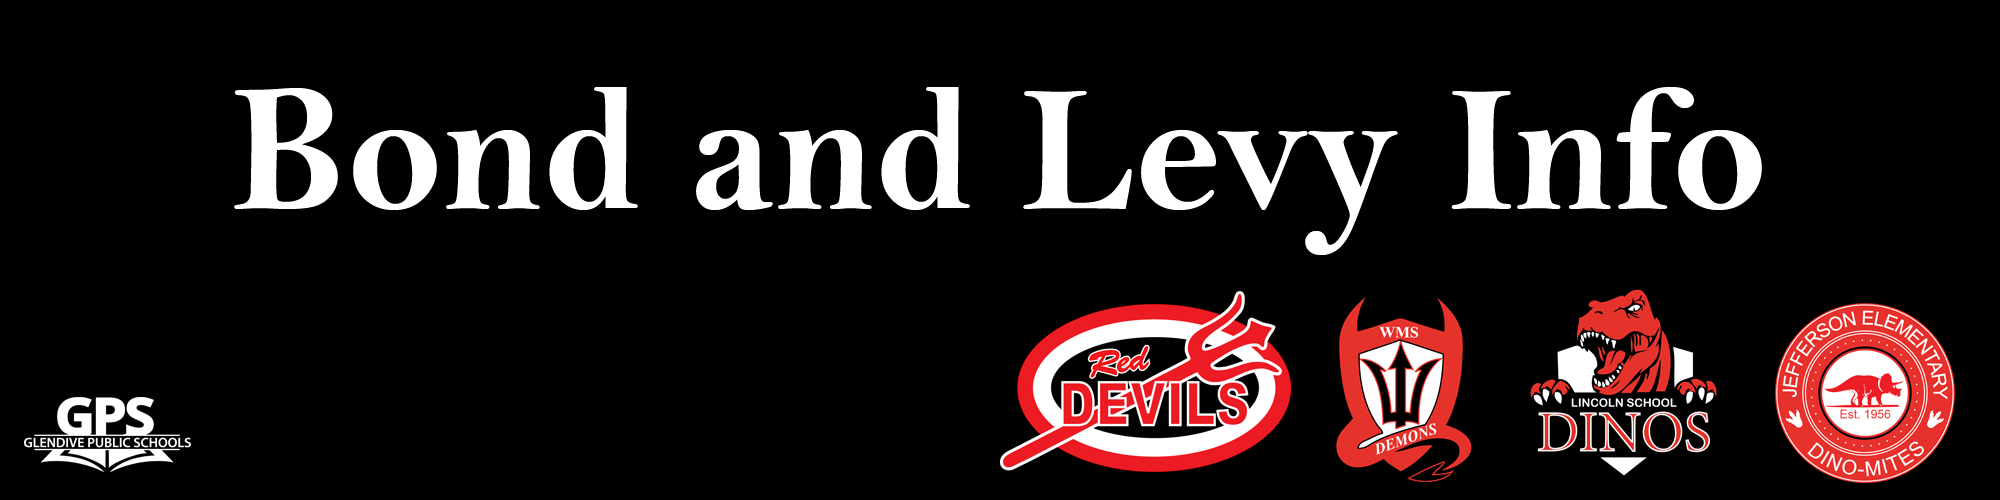 Bond and Levy Info - Banner with logos